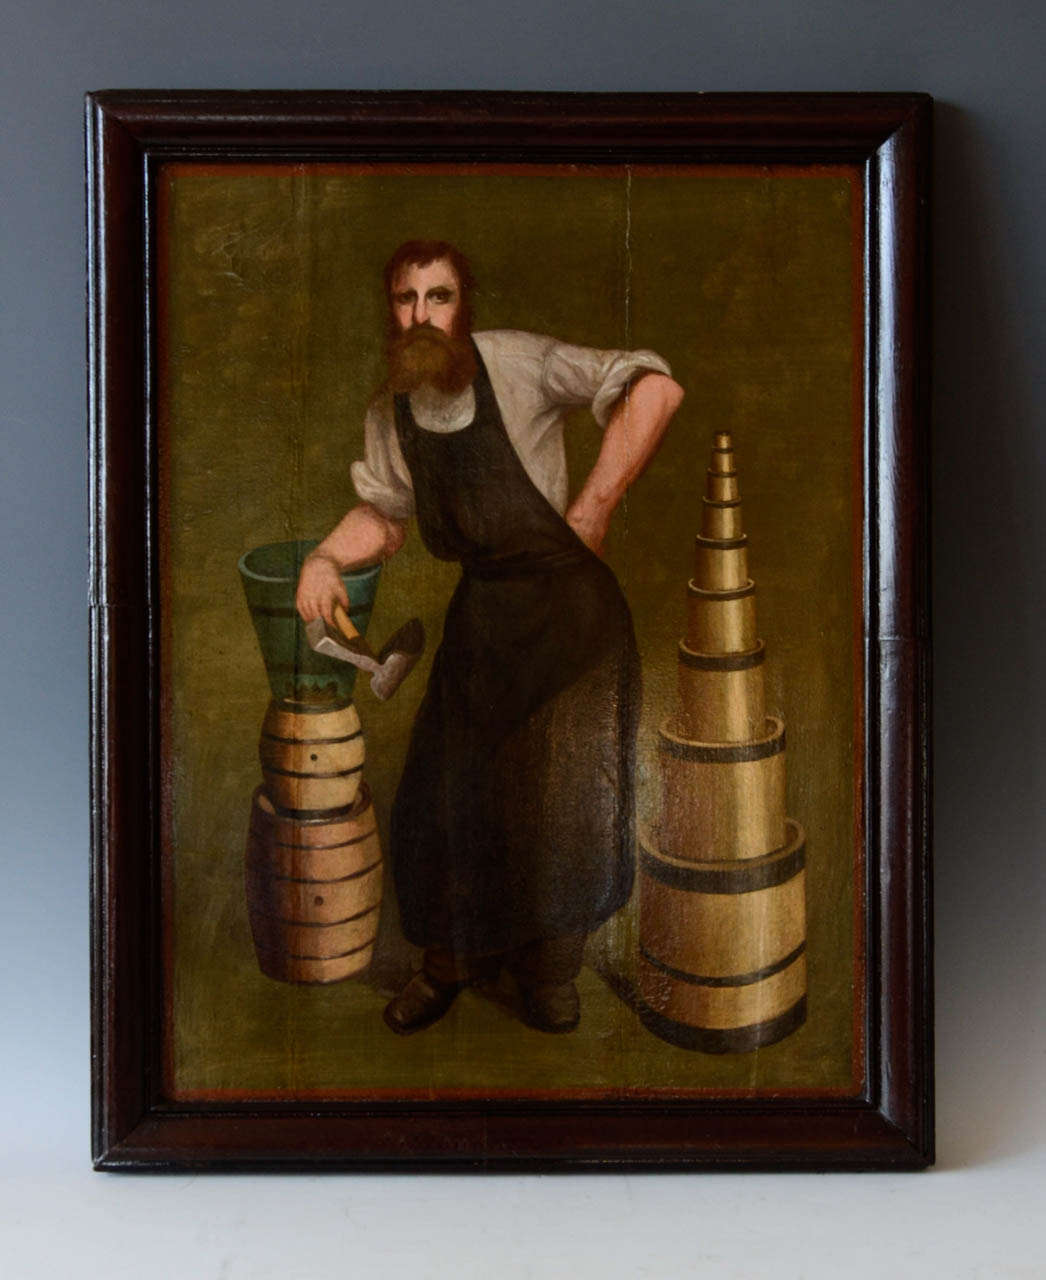 The cooper is represented upright with his apron and holding his adze.
Around him, barrels, bucket and wood measures of all the sizes.